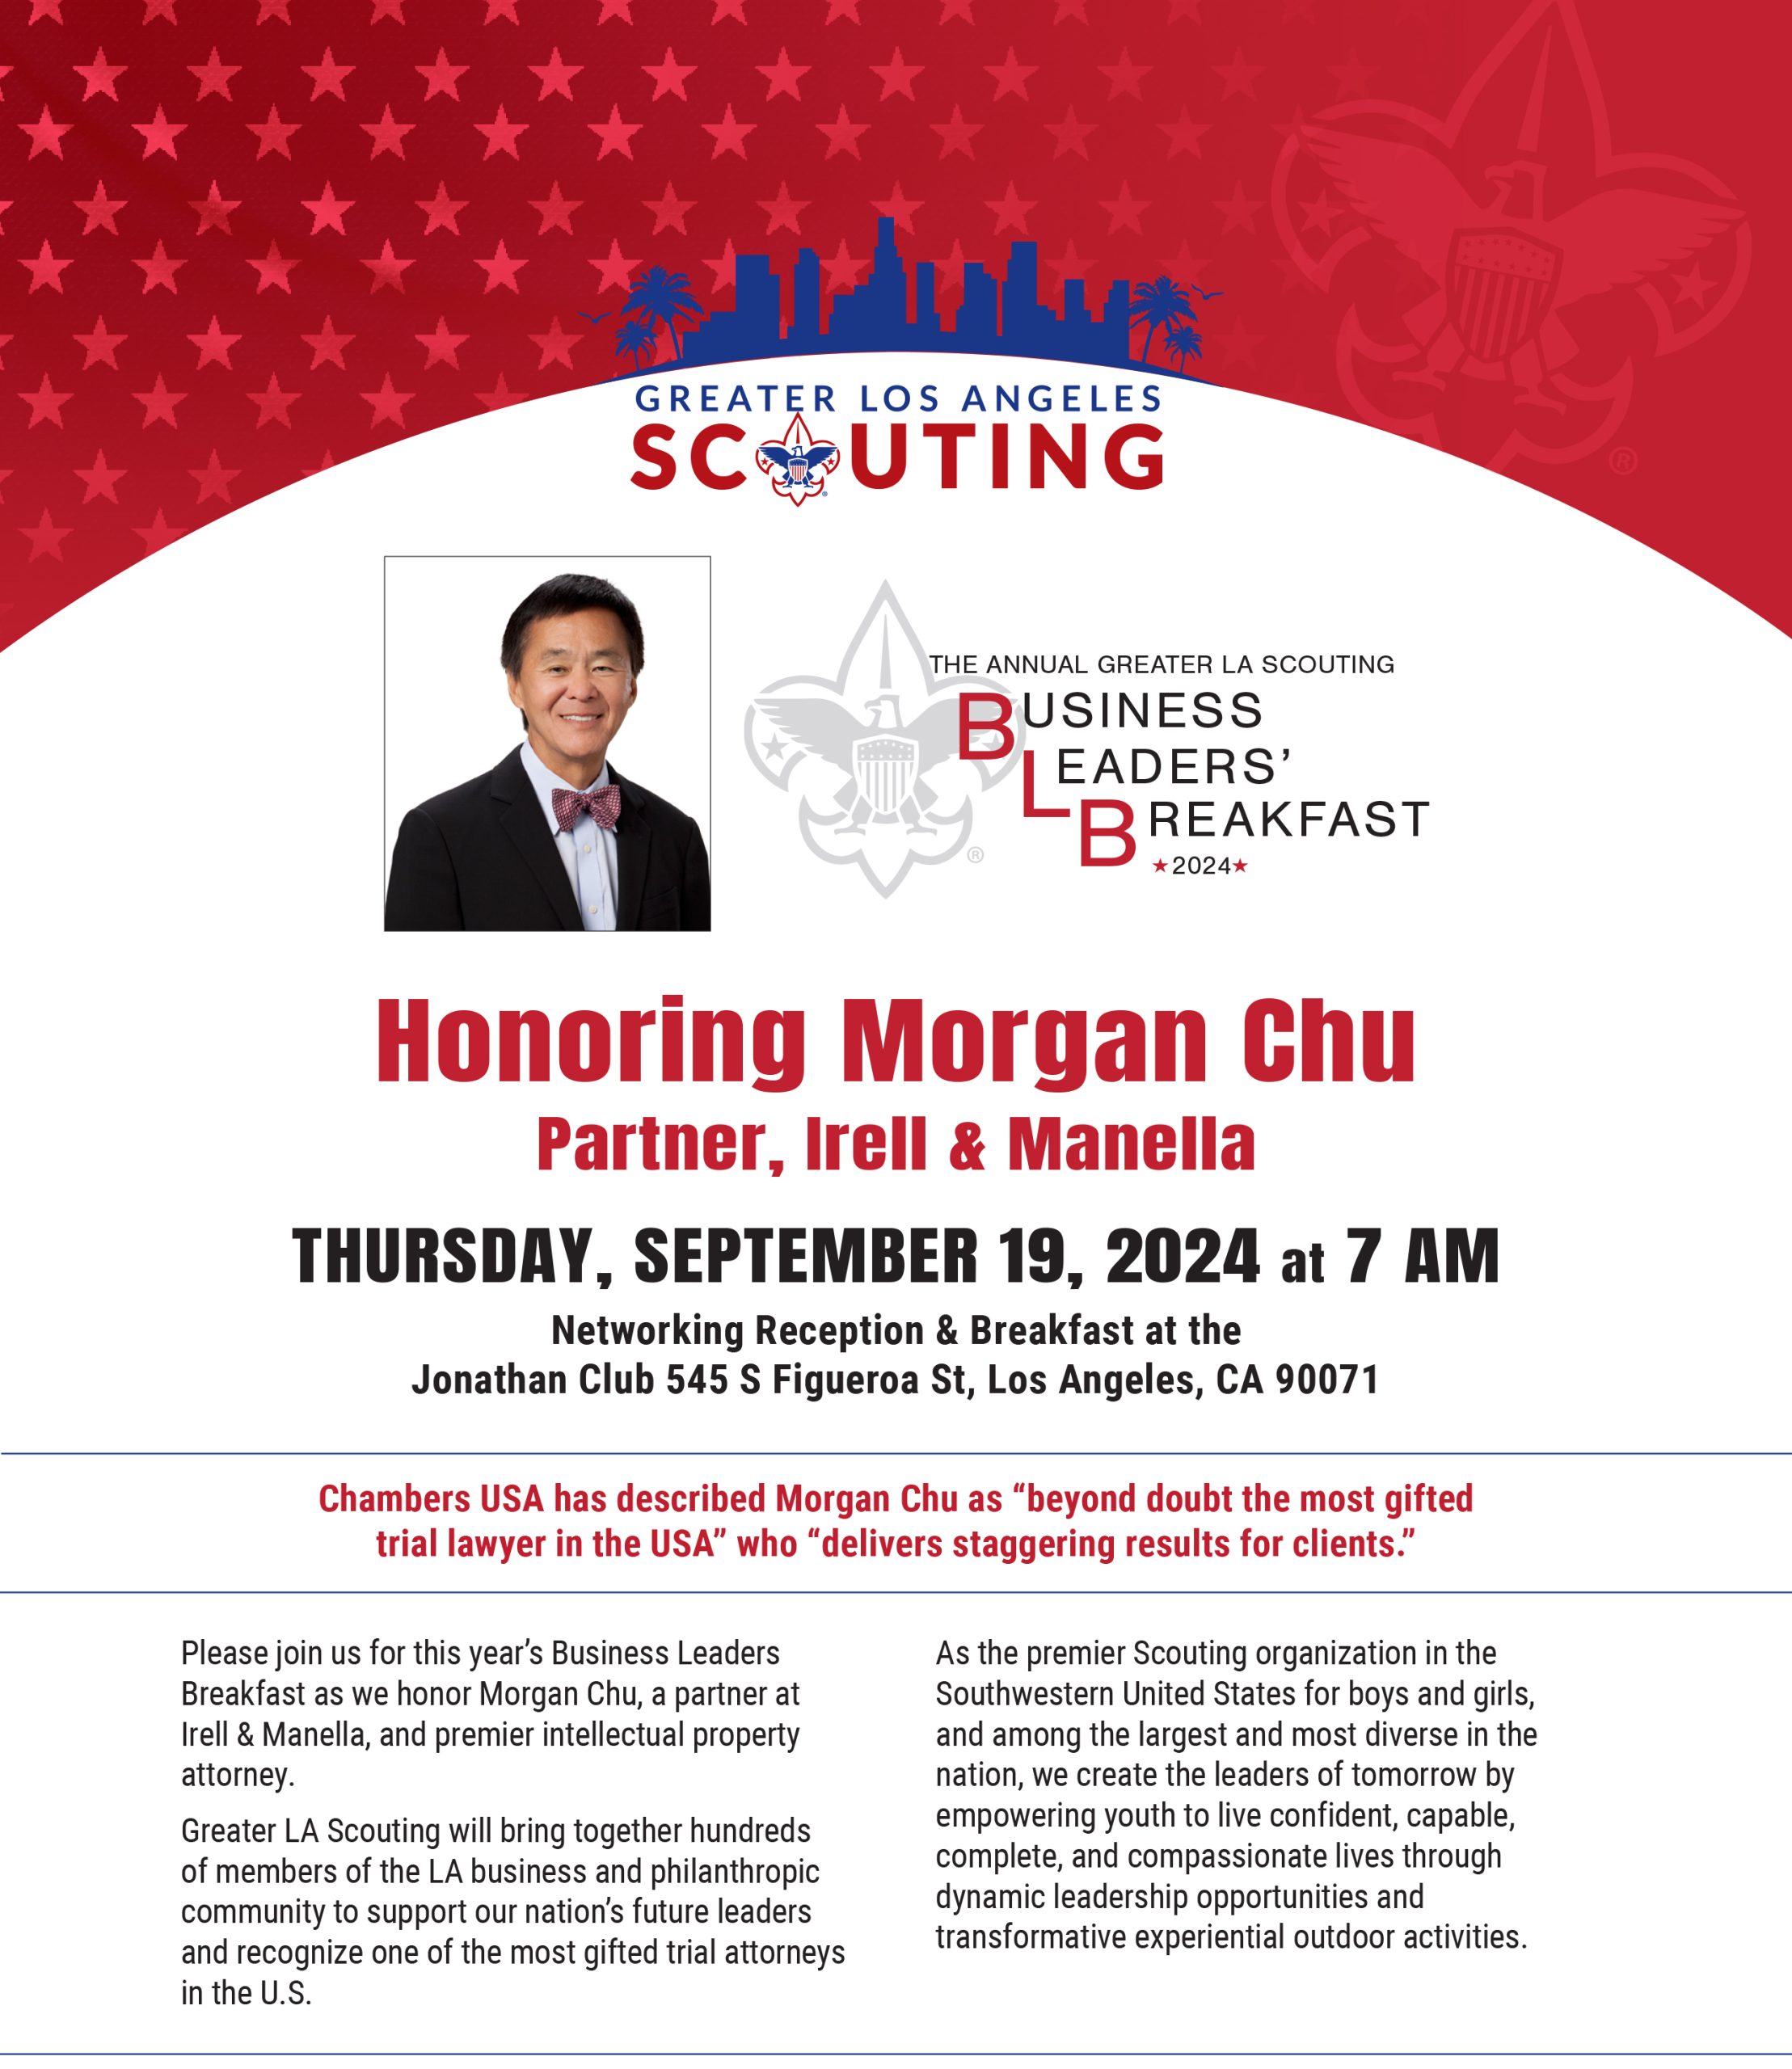 lease join us for this year’s Business Leaders Breakfast as we honor Morgan Chu, a partner at Irell & Manella, and premier intellectual property attorney. Greater LA Scouting will bring together hundreds of members of the LA business and philanthropic community to support our nation’s future leaders and recognize one of the most gifted trial attorneys in the U.S. As the premier Scouting organization in the Southwestern United States for boys and girls, and among the largest and most diverse in the nation, we create the leaders of tomorrow by empowering youth to live confident, capable, complete, and compassionate lives through dynamic leadership opportunities and transformative experiential outdoor activities.